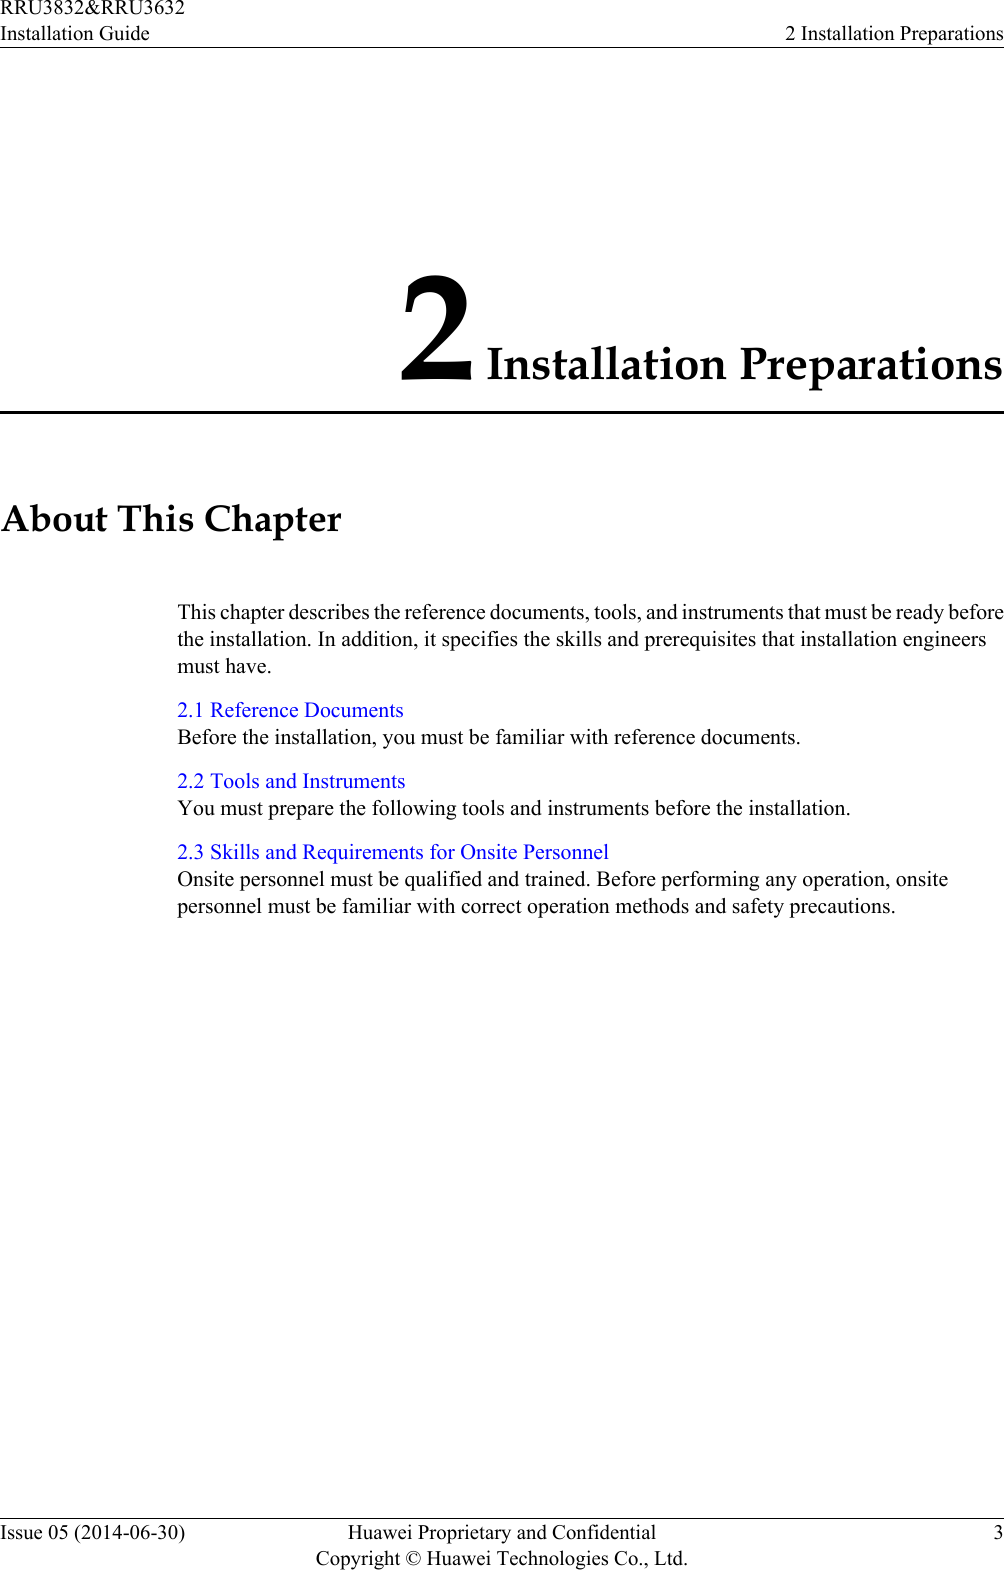 2 Installation PreparationsAbout This ChapterThis chapter describes the reference documents, tools, and instruments that must be ready beforethe installation. In addition, it specifies the skills and prerequisites that installation engineersmust have.2.1 Reference DocumentsBefore the installation, you must be familiar with reference documents.2.2 Tools and InstrumentsYou must prepare the following tools and instruments before the installation.2.3 Skills and Requirements for Onsite PersonnelOnsite personnel must be qualified and trained. Before performing any operation, onsitepersonnel must be familiar with correct operation methods and safety precautions.RRU3832&amp;RRU3632Installation Guide 2 Installation PreparationsIssue 05 (2014-06-30) Huawei Proprietary and ConfidentialCopyright © Huawei Technologies Co., Ltd.3